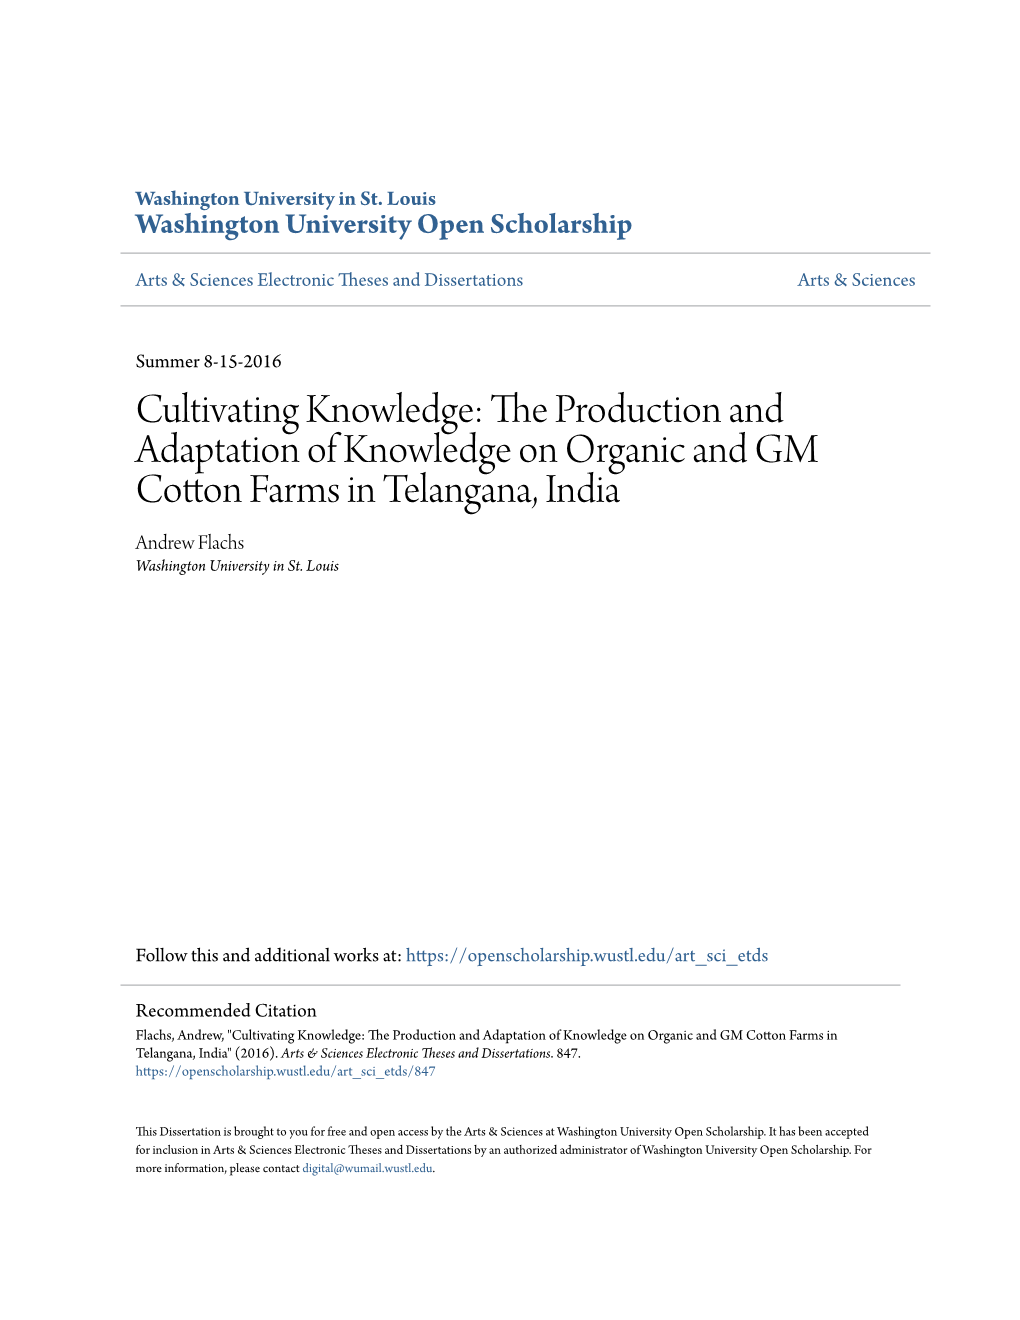 The Production and Adaptation of Knowledge on Organic and GM Cotton Farms in Telangana, India